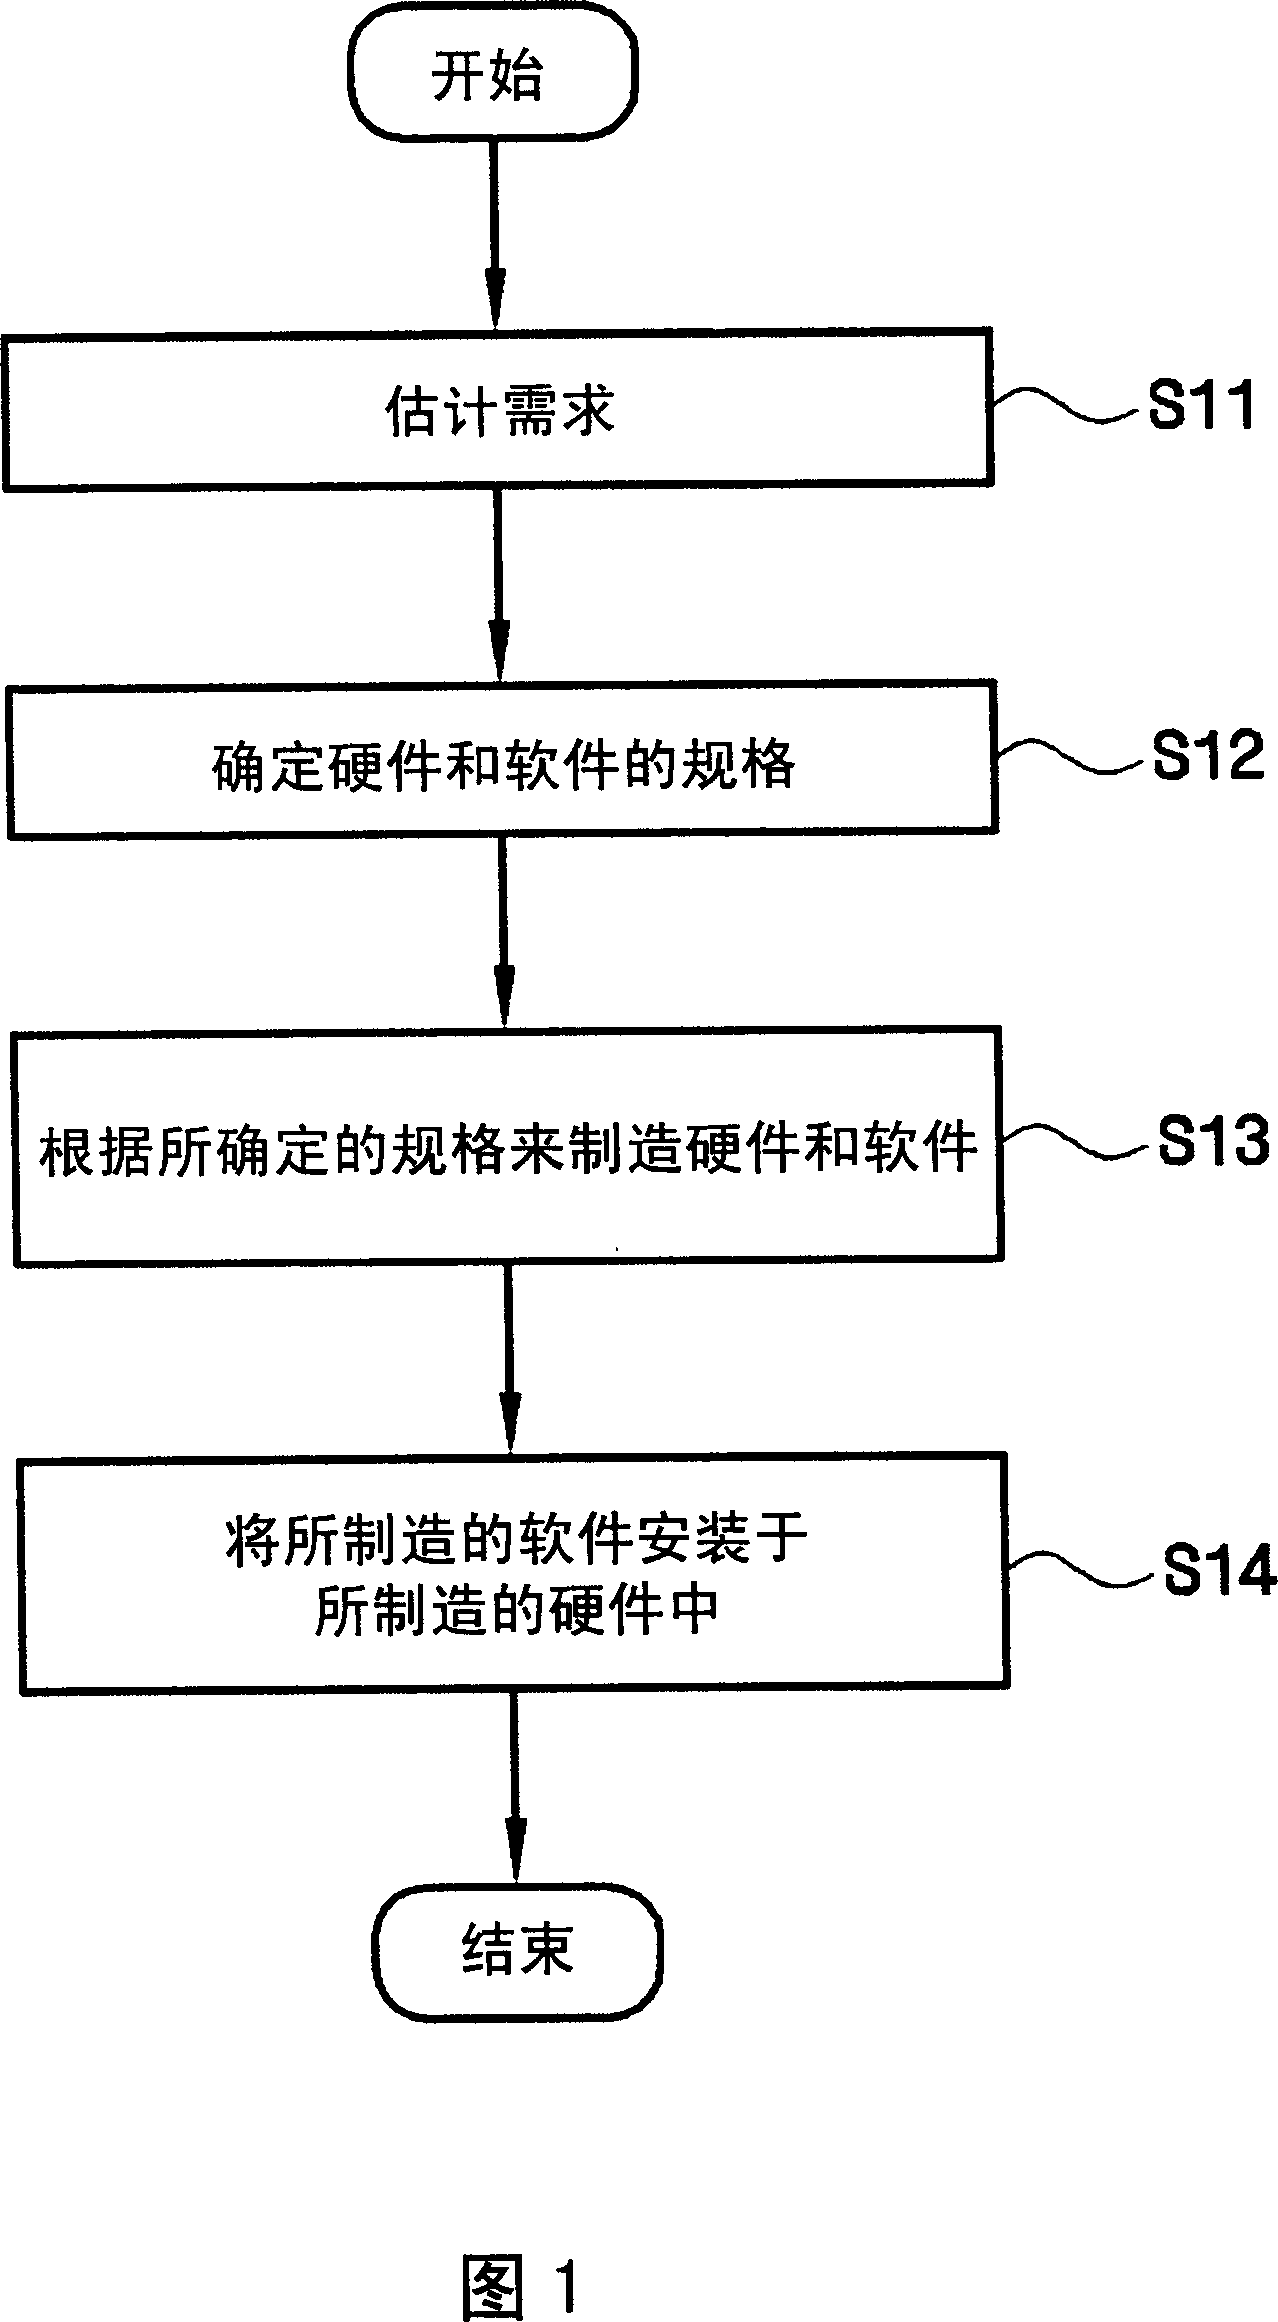 Apparatus and method for mounting software